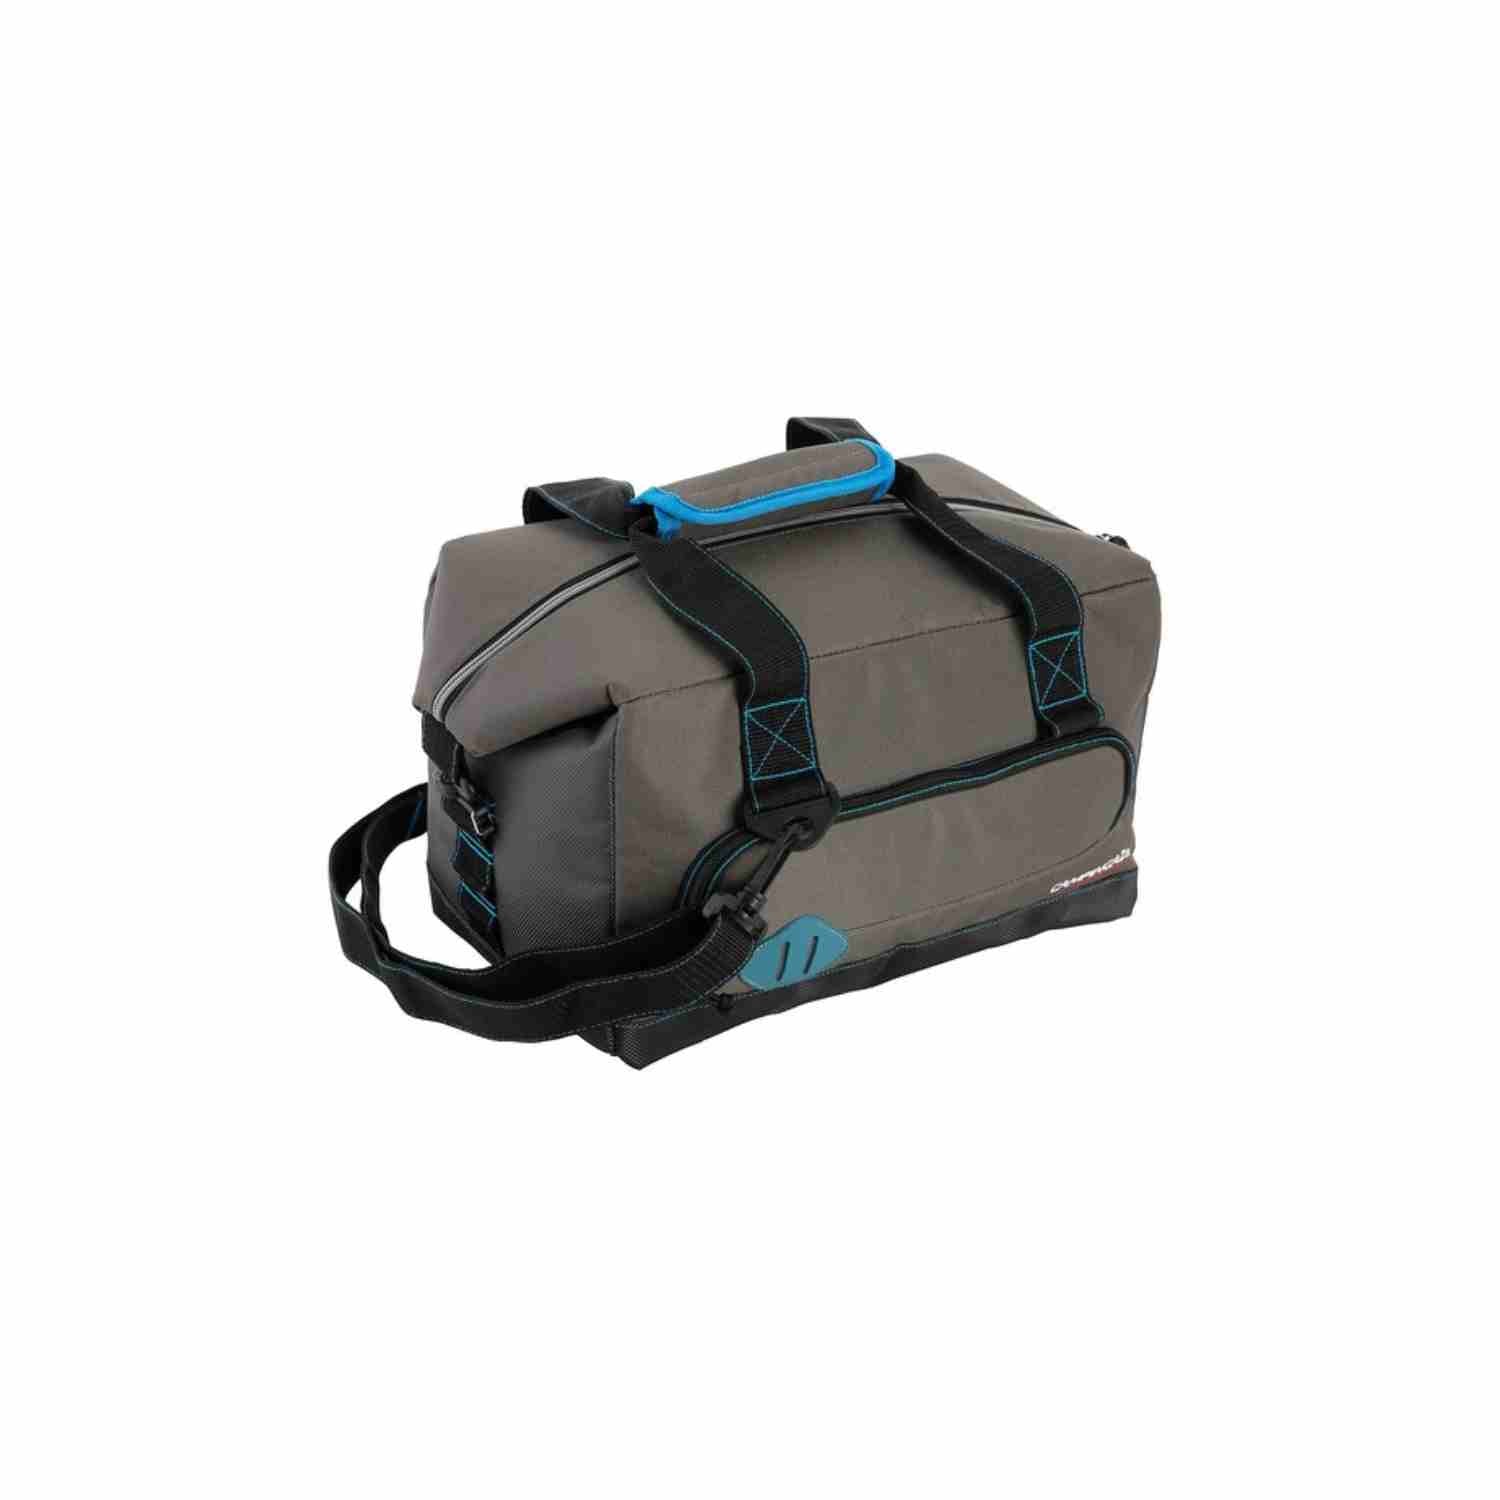 Sac isotherme CAMPINGAZ The Office - Doctor bag 20 l